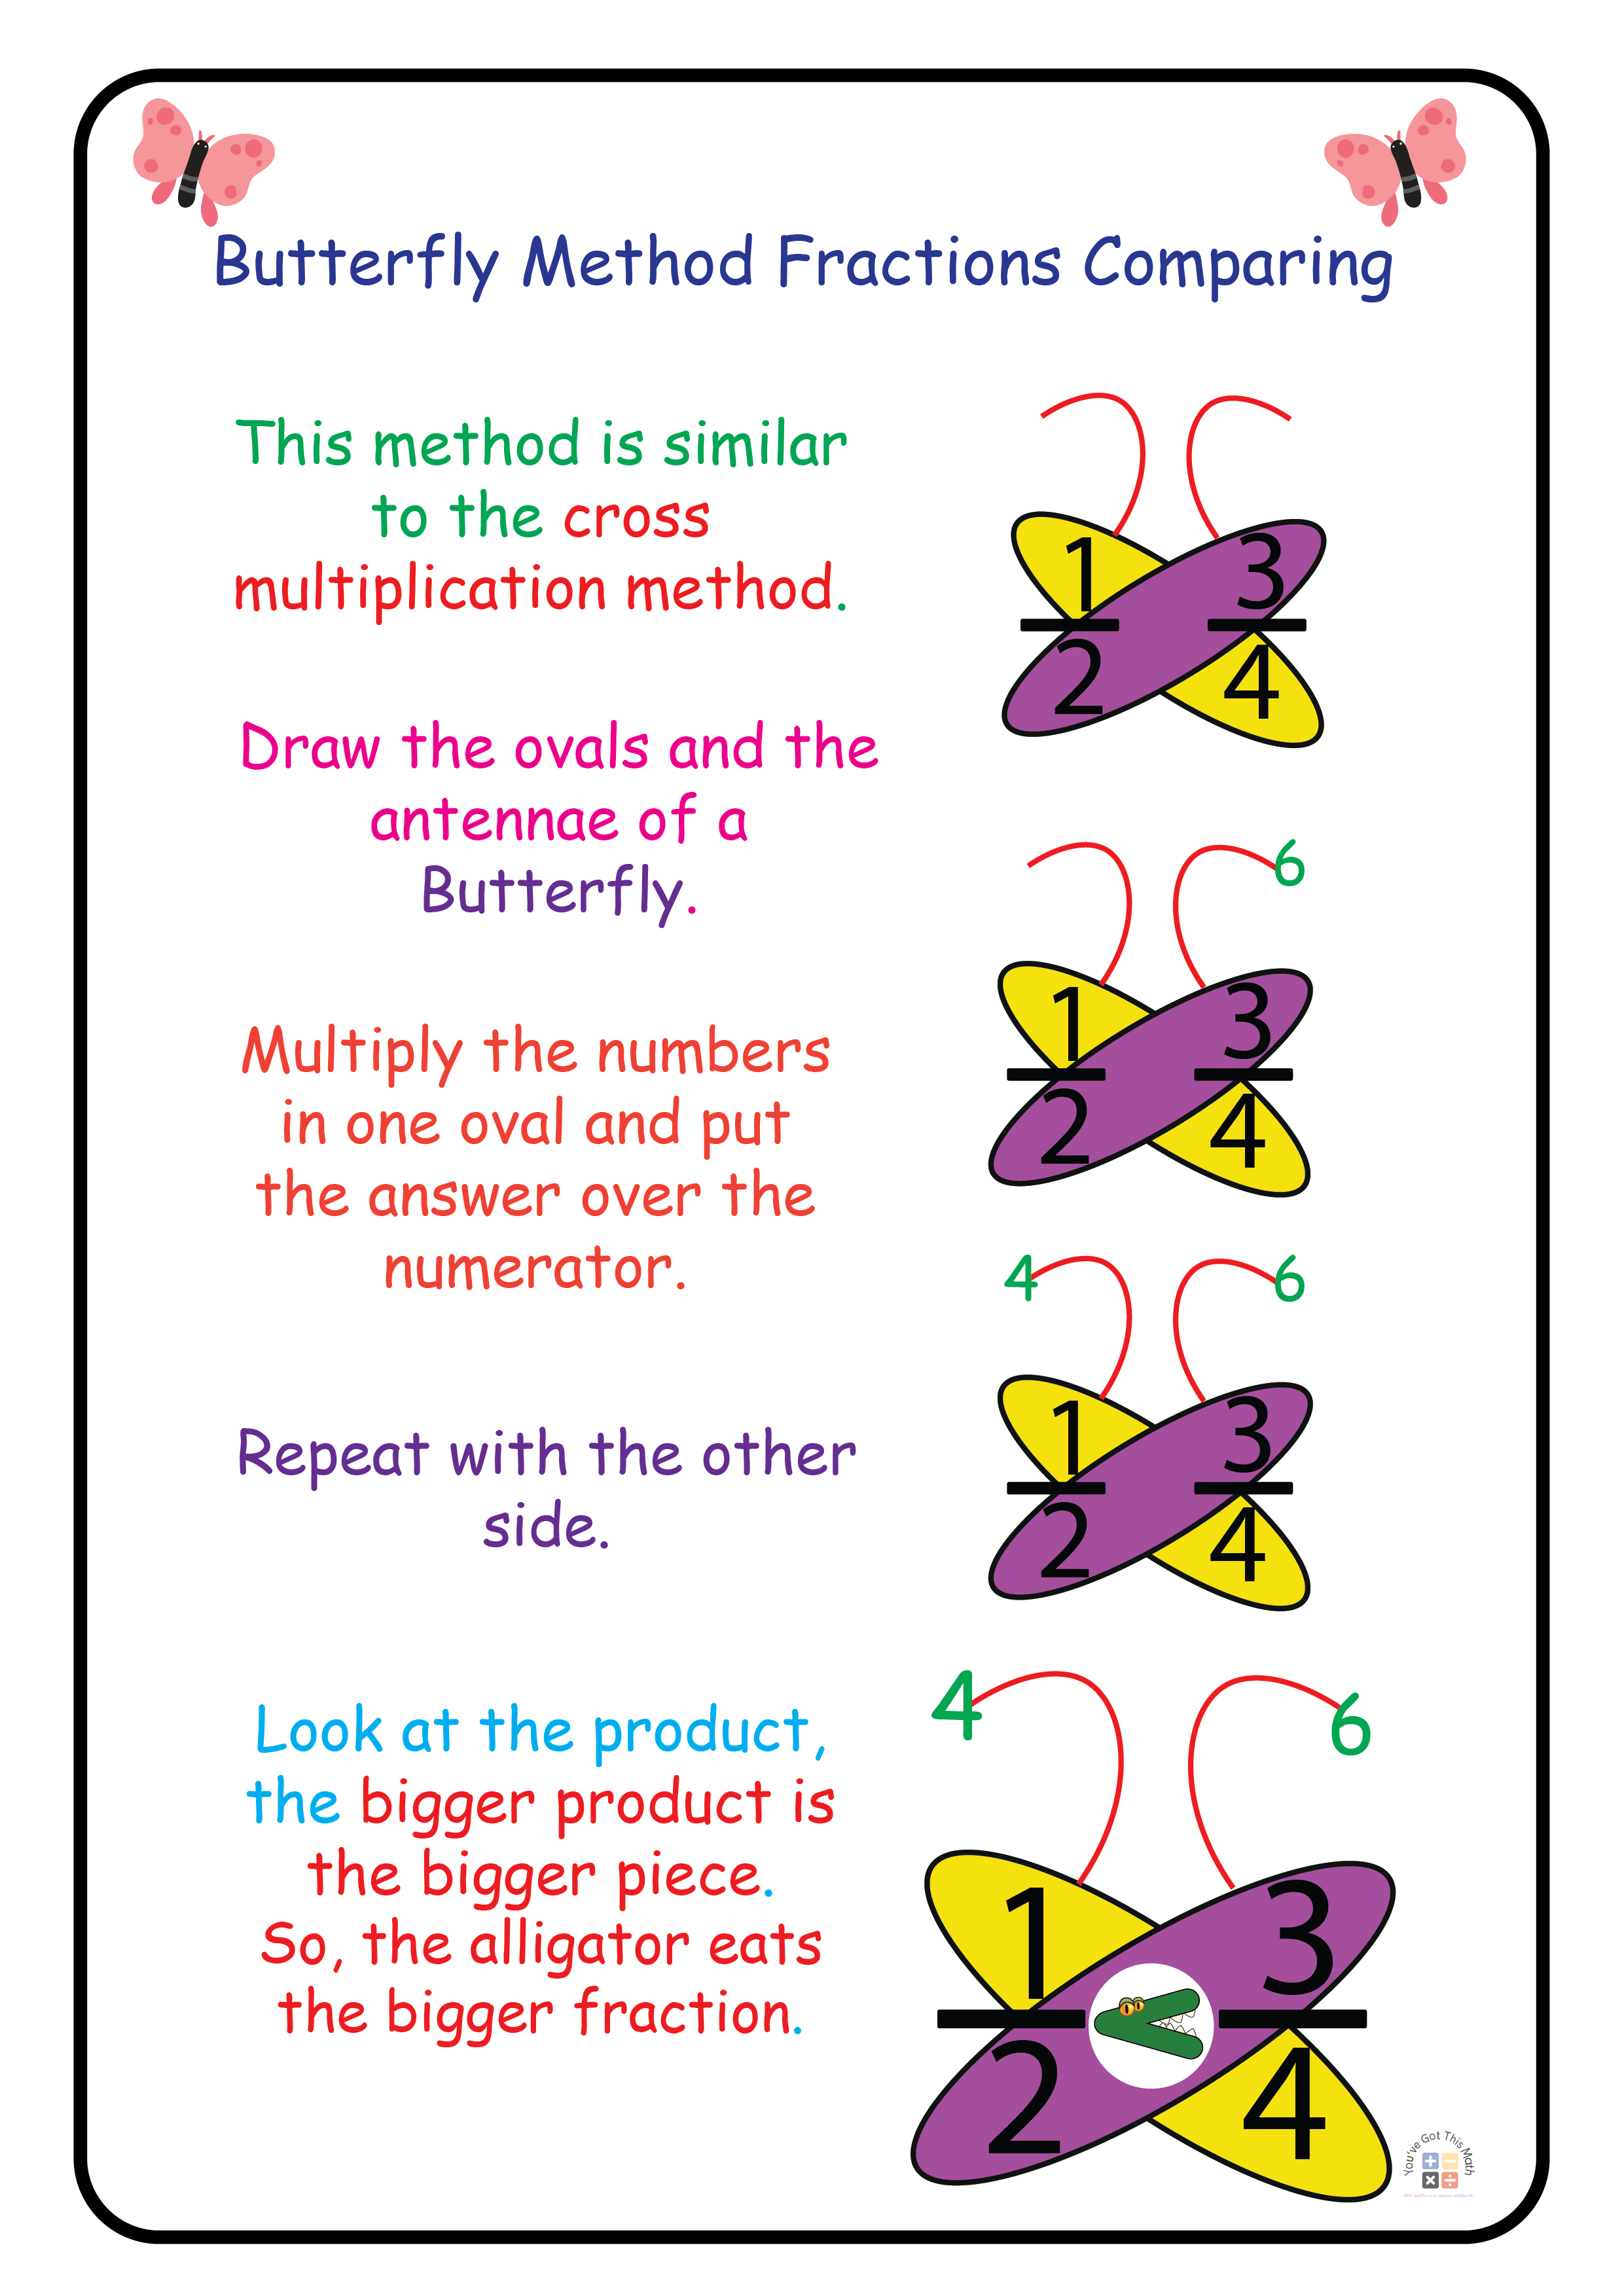 Butterfly Method Fractions Comparing